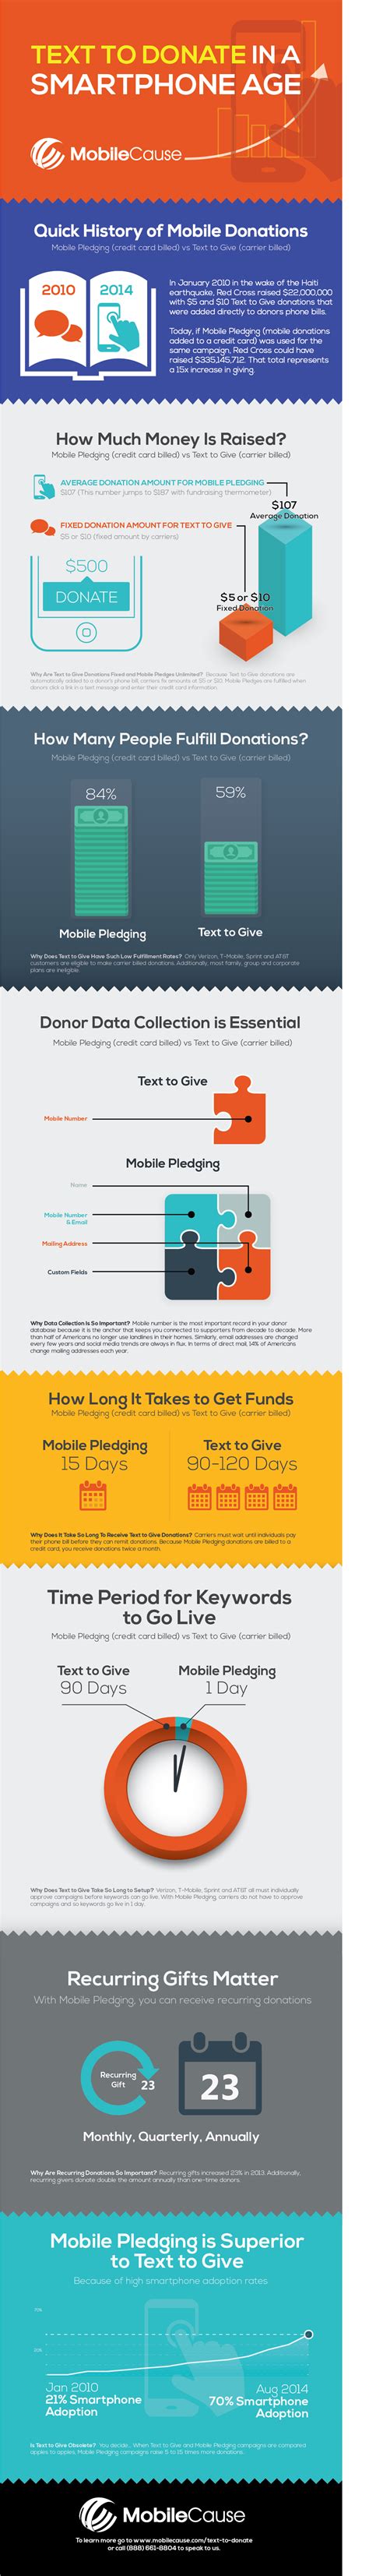 Text to Donate Infographic | MobileCause | Infographic, Business infographic, Fundraising